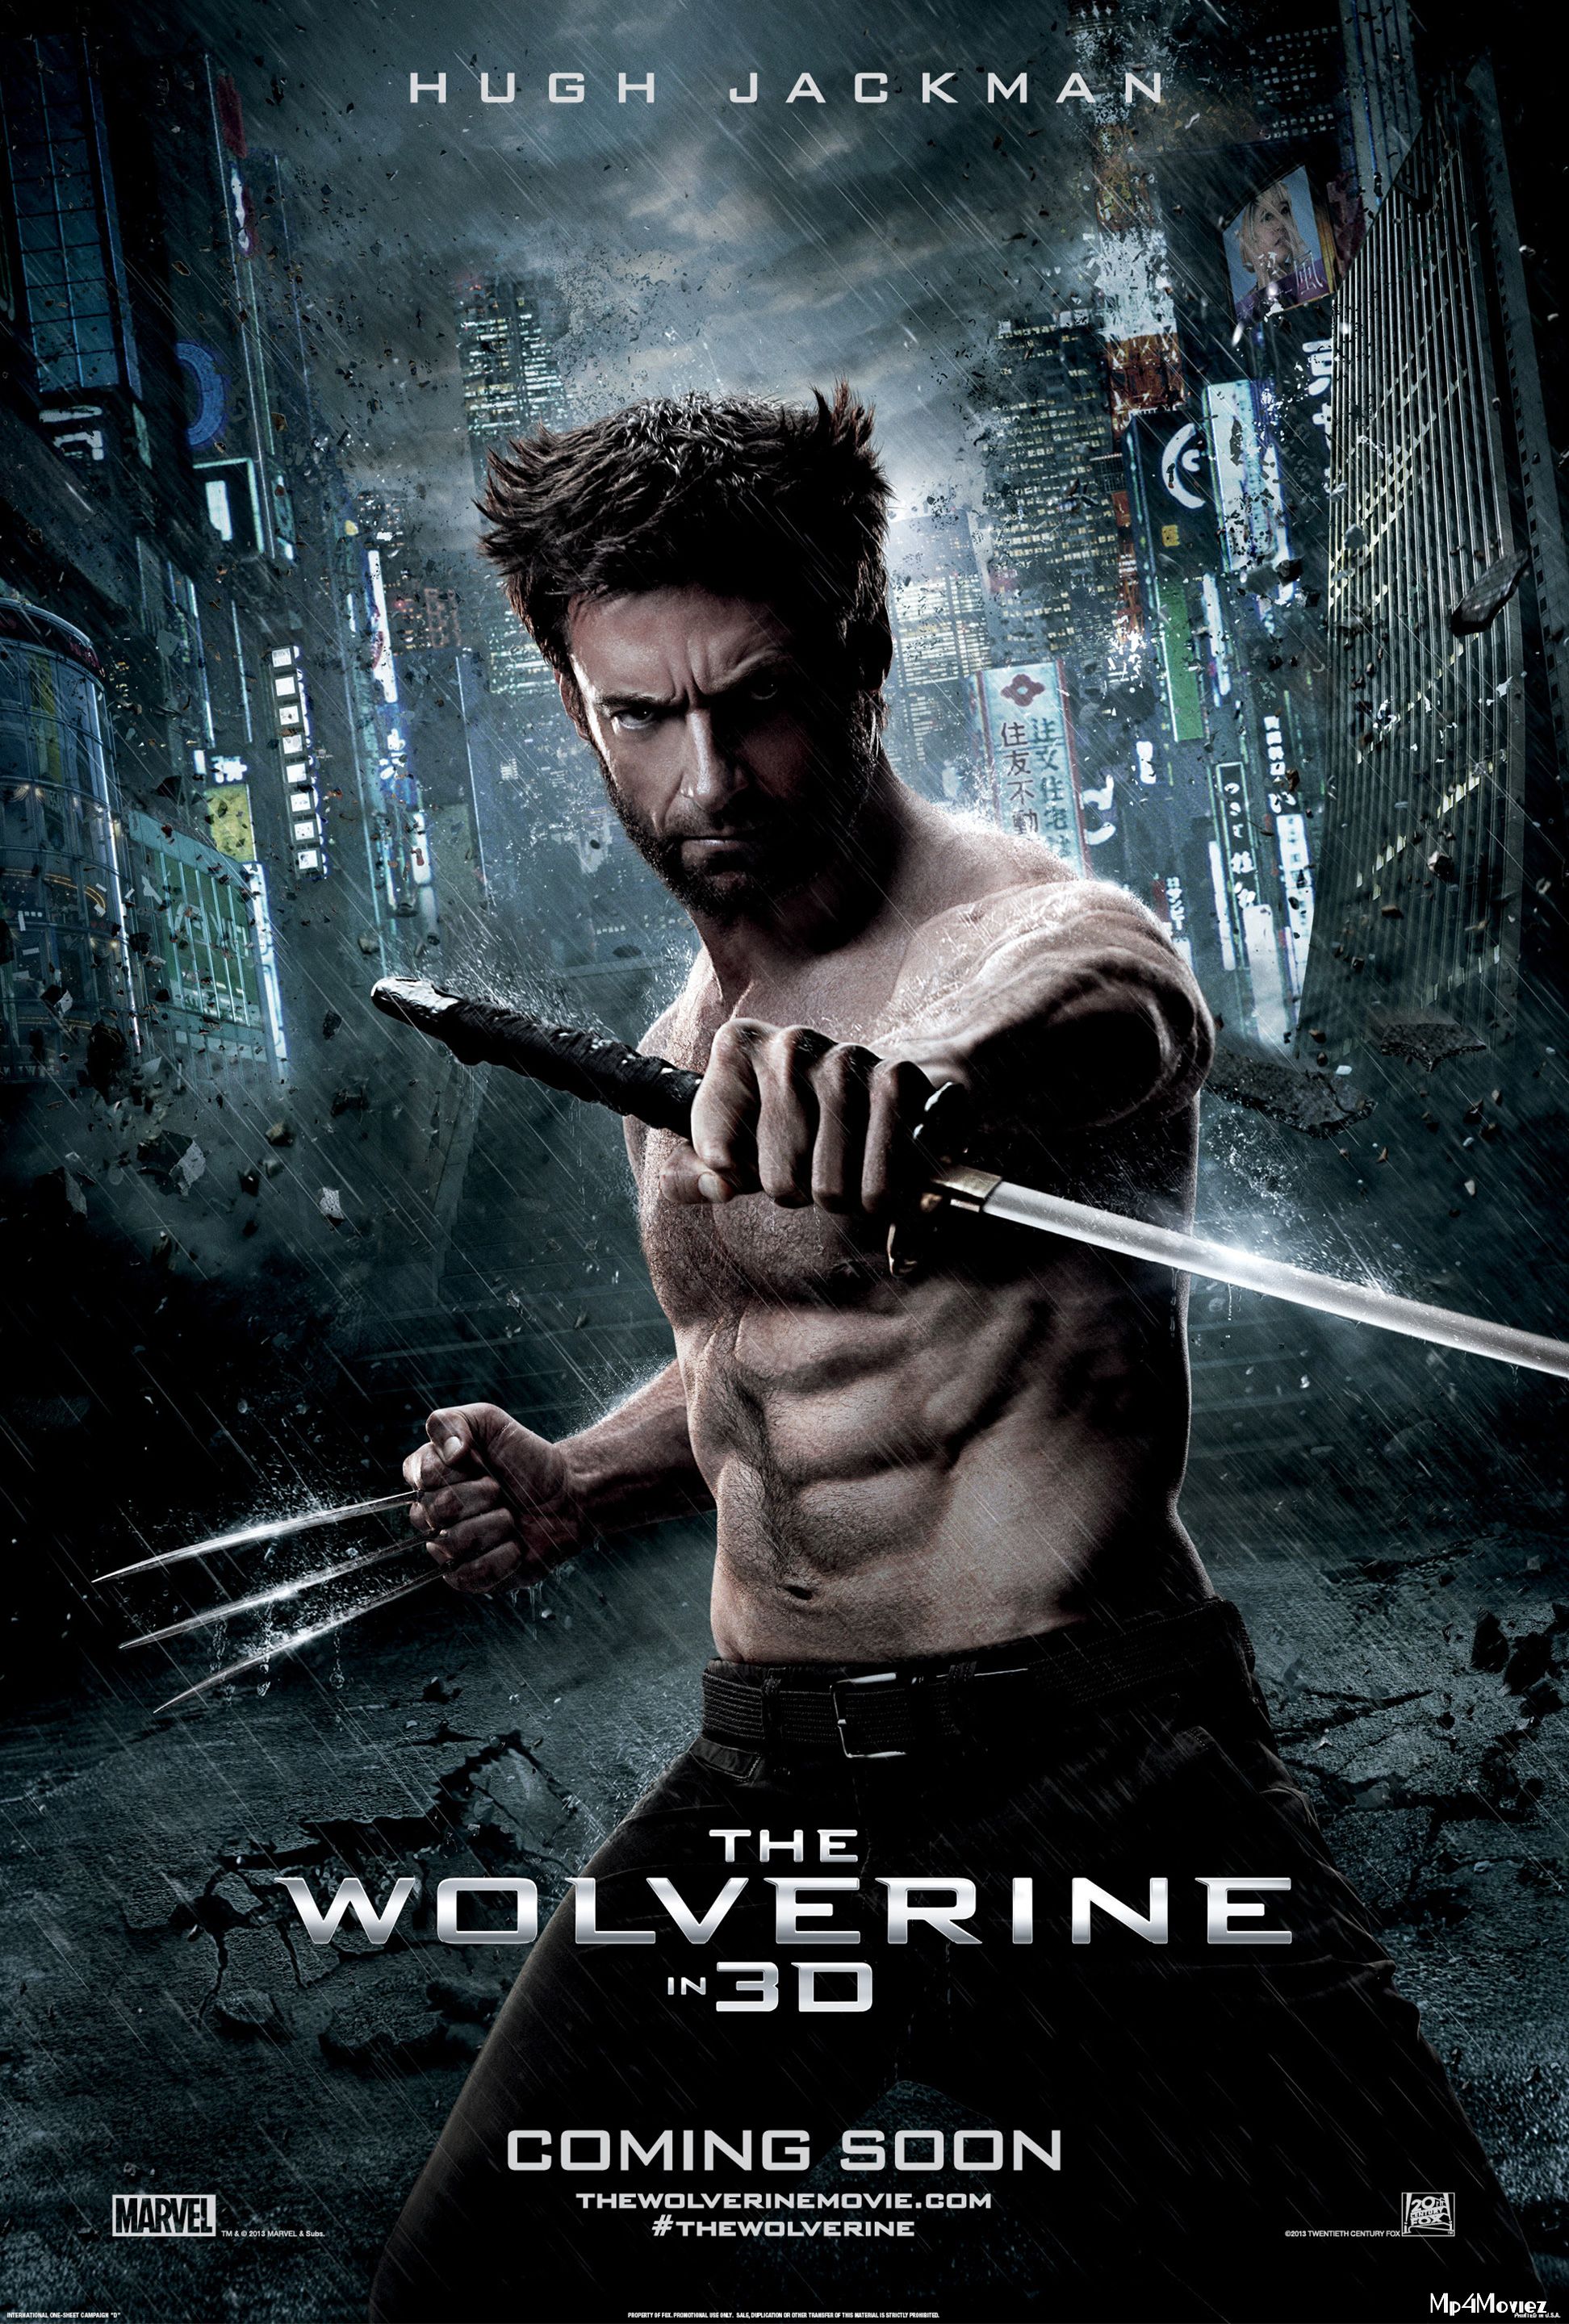 The Wolverine 2013 Hindi Dubbed Full Movie download full movie